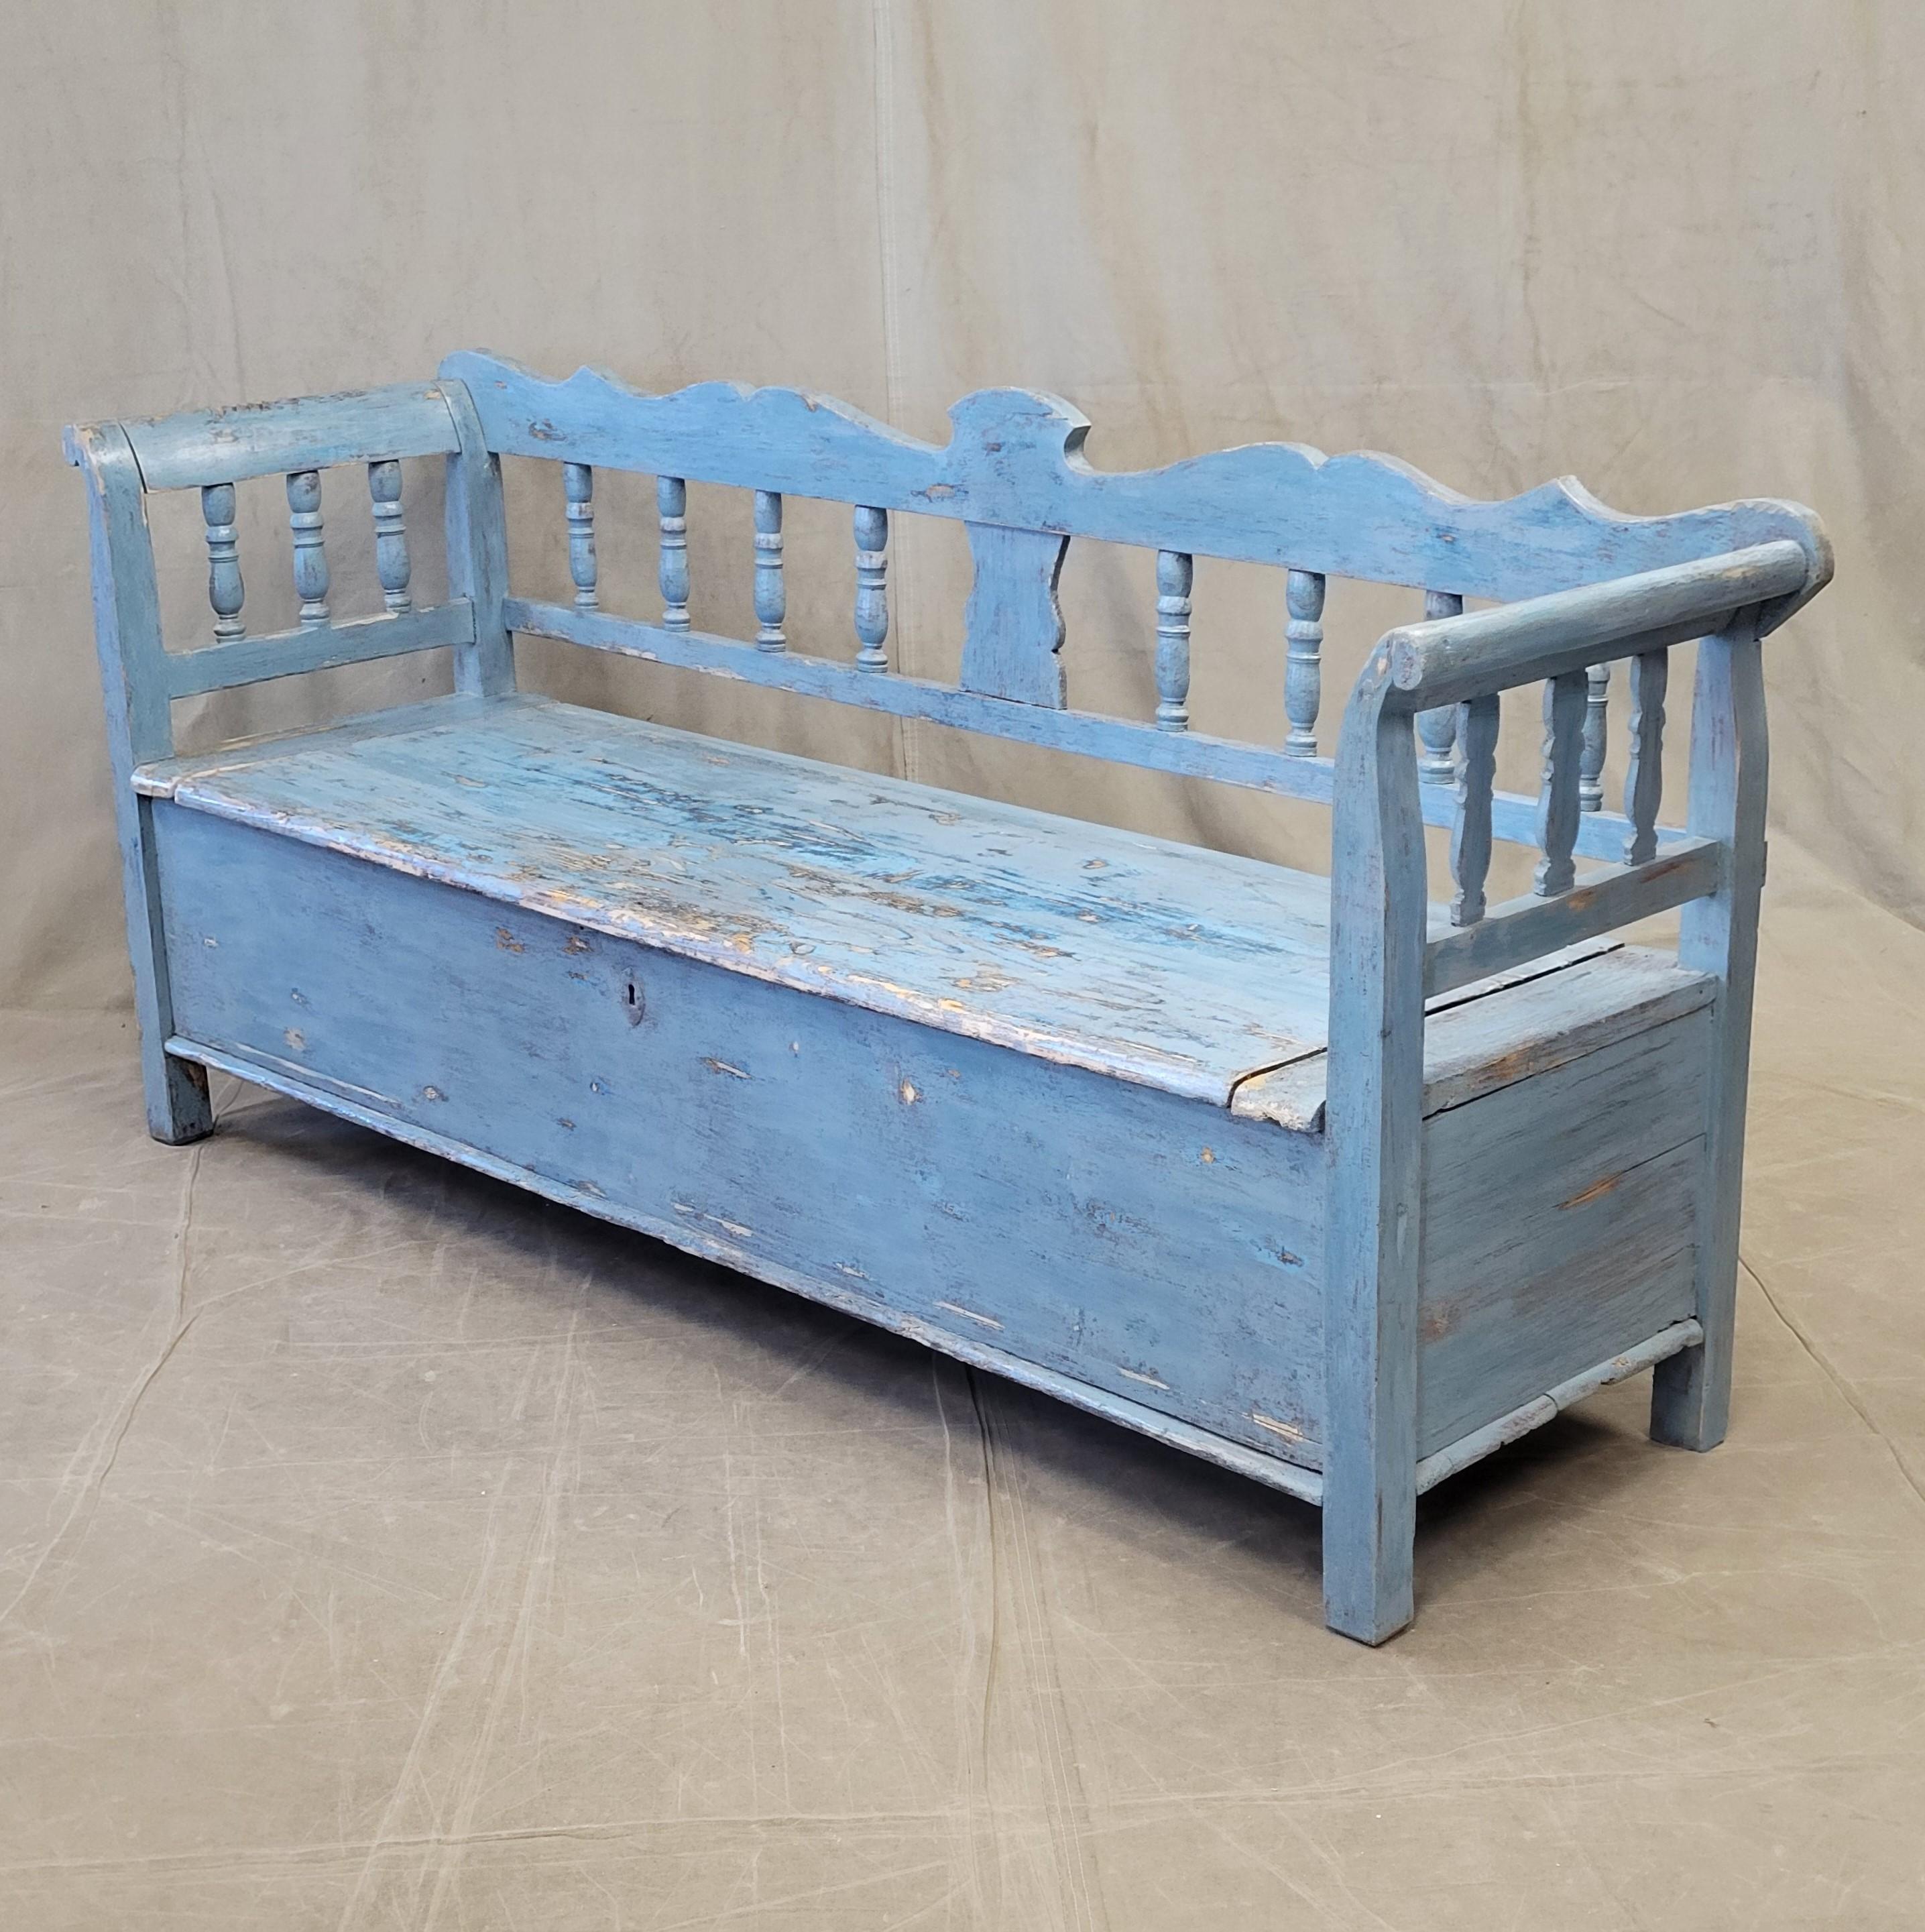 An absolutely charming antique 1920s or earlier Hungarian or Eastern European storage bench with old sky and colbalt blue paint. The old painted blue finish has been sanded smooth, sealed with furniture wax, and buffed to a beautiful sheen. Offers a